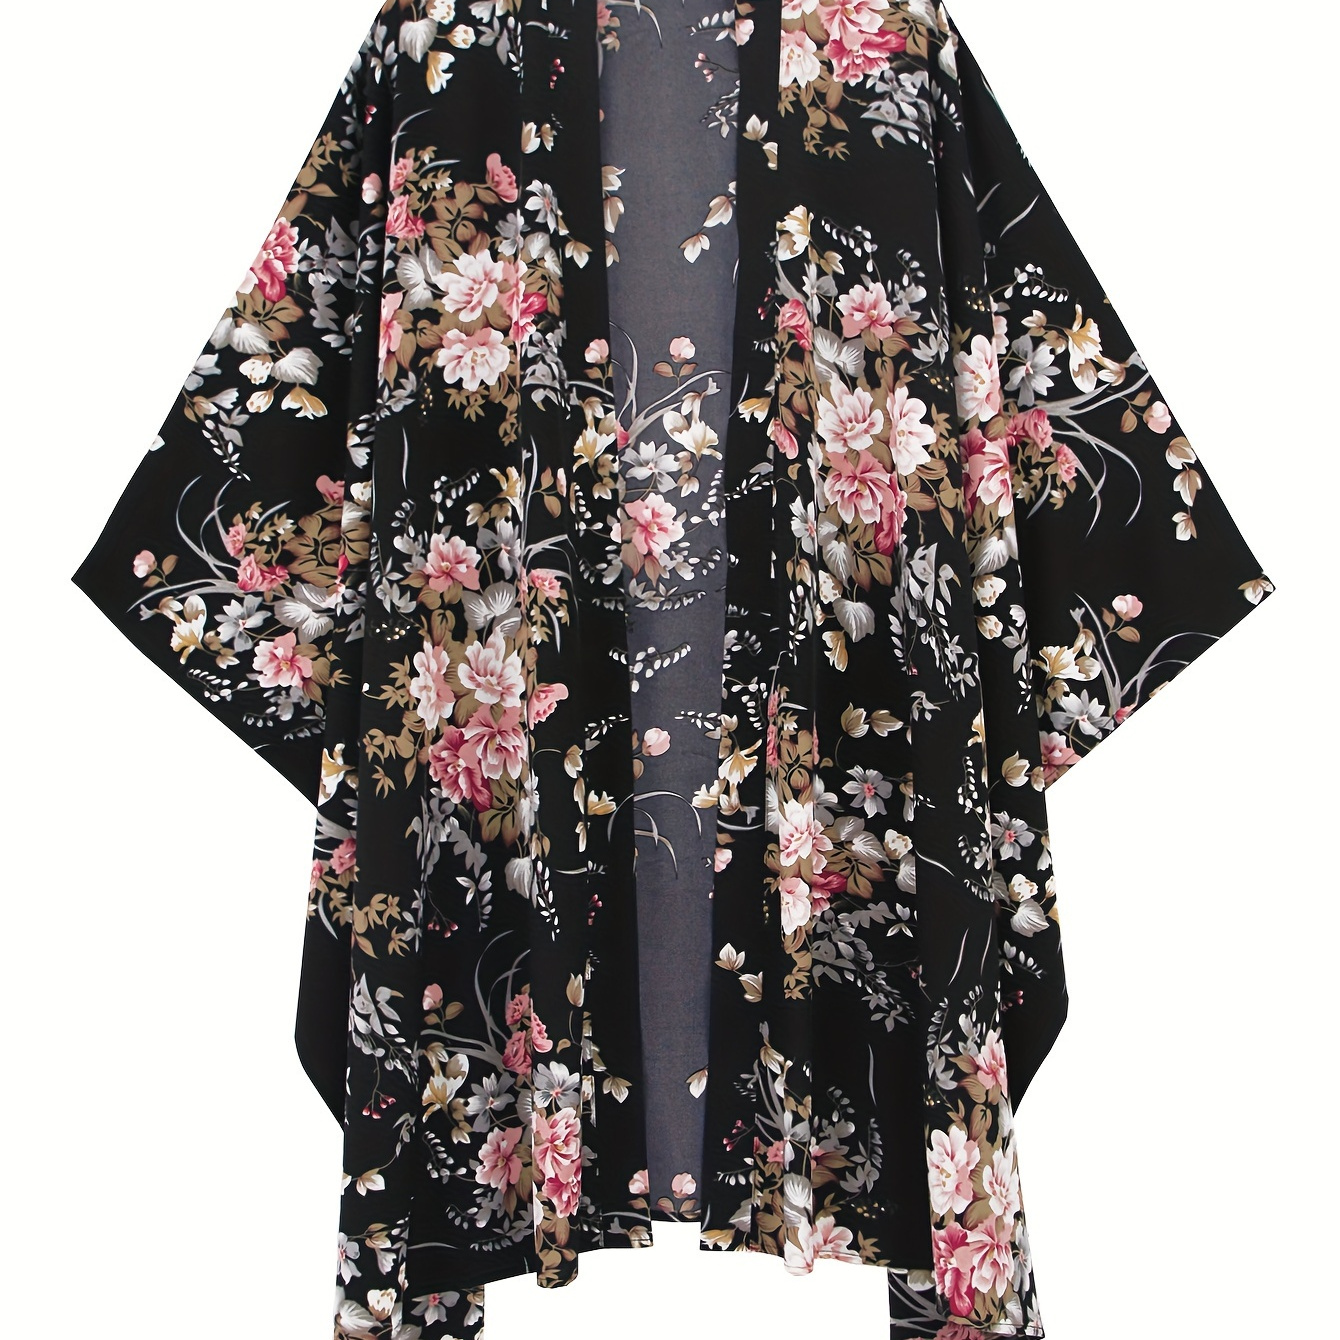 

Black Floral Print Loose Cover Up Cardigan, Open Front Kimono Sleeve Casual Cover Up, Women's Swimwear & Clothing